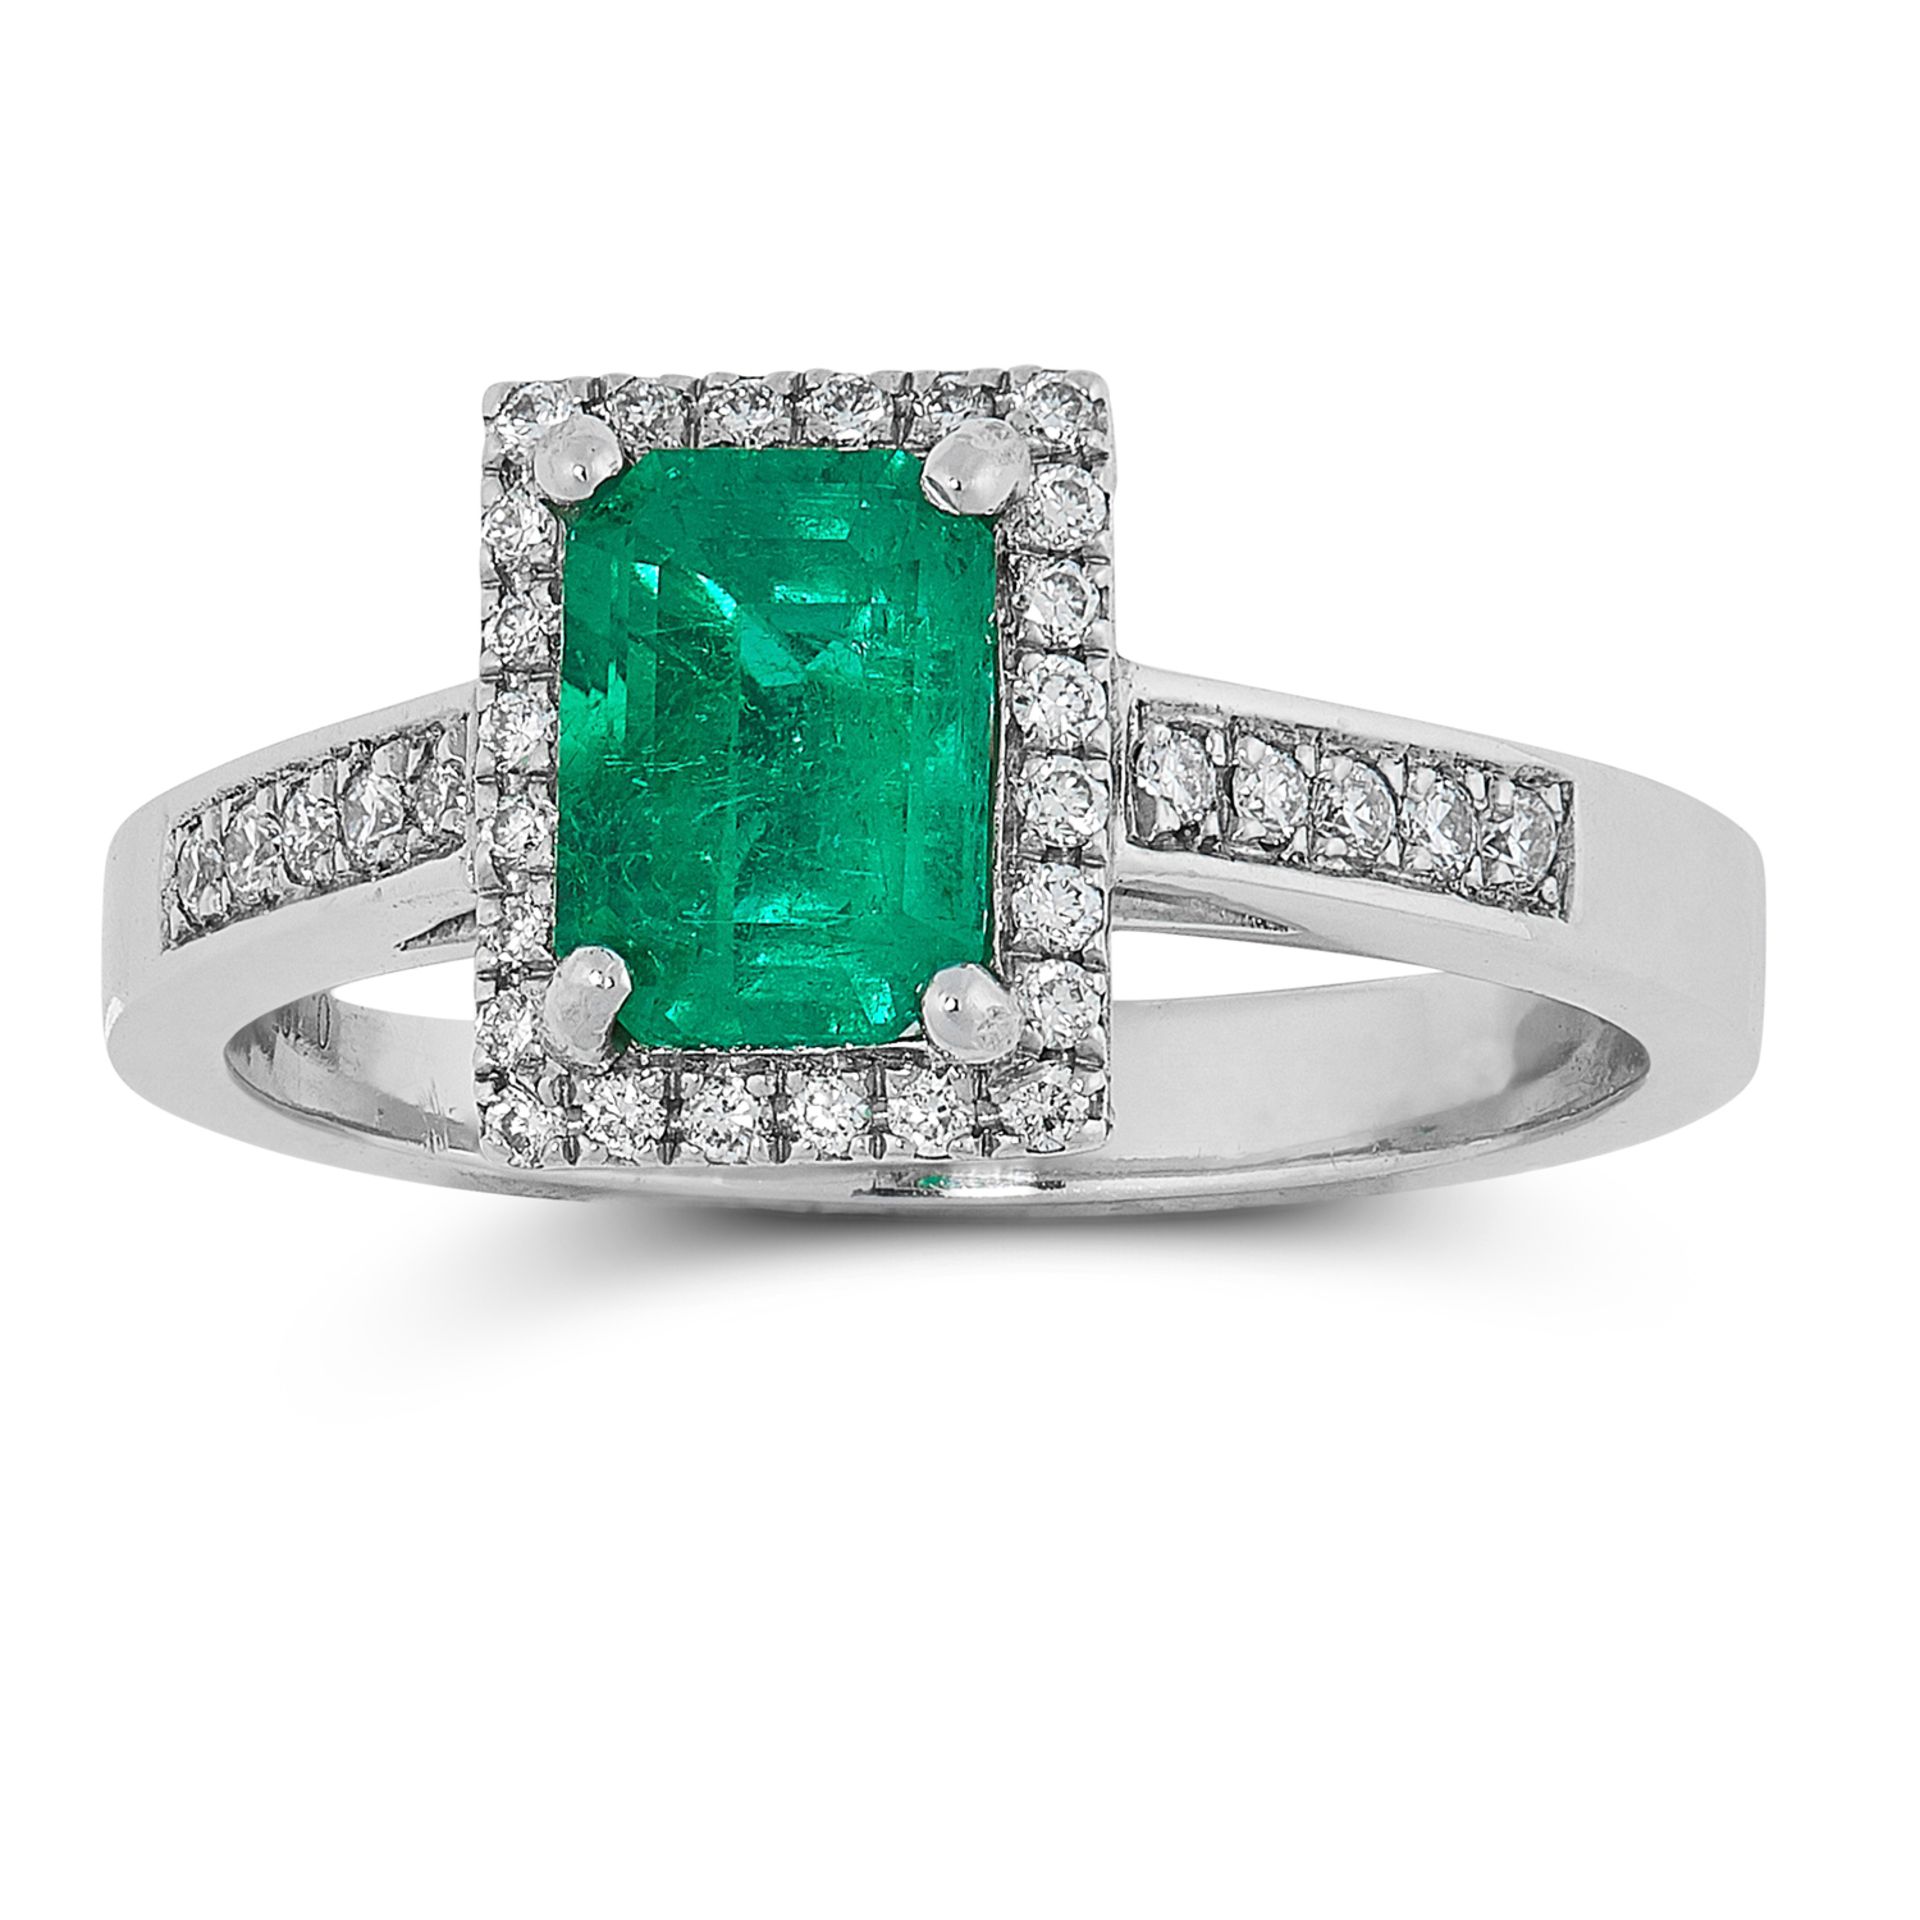 A COLOMBIAN EMERALD AND DIAMOND RING in platinum, set with a single emerald cut emerald of 0.91